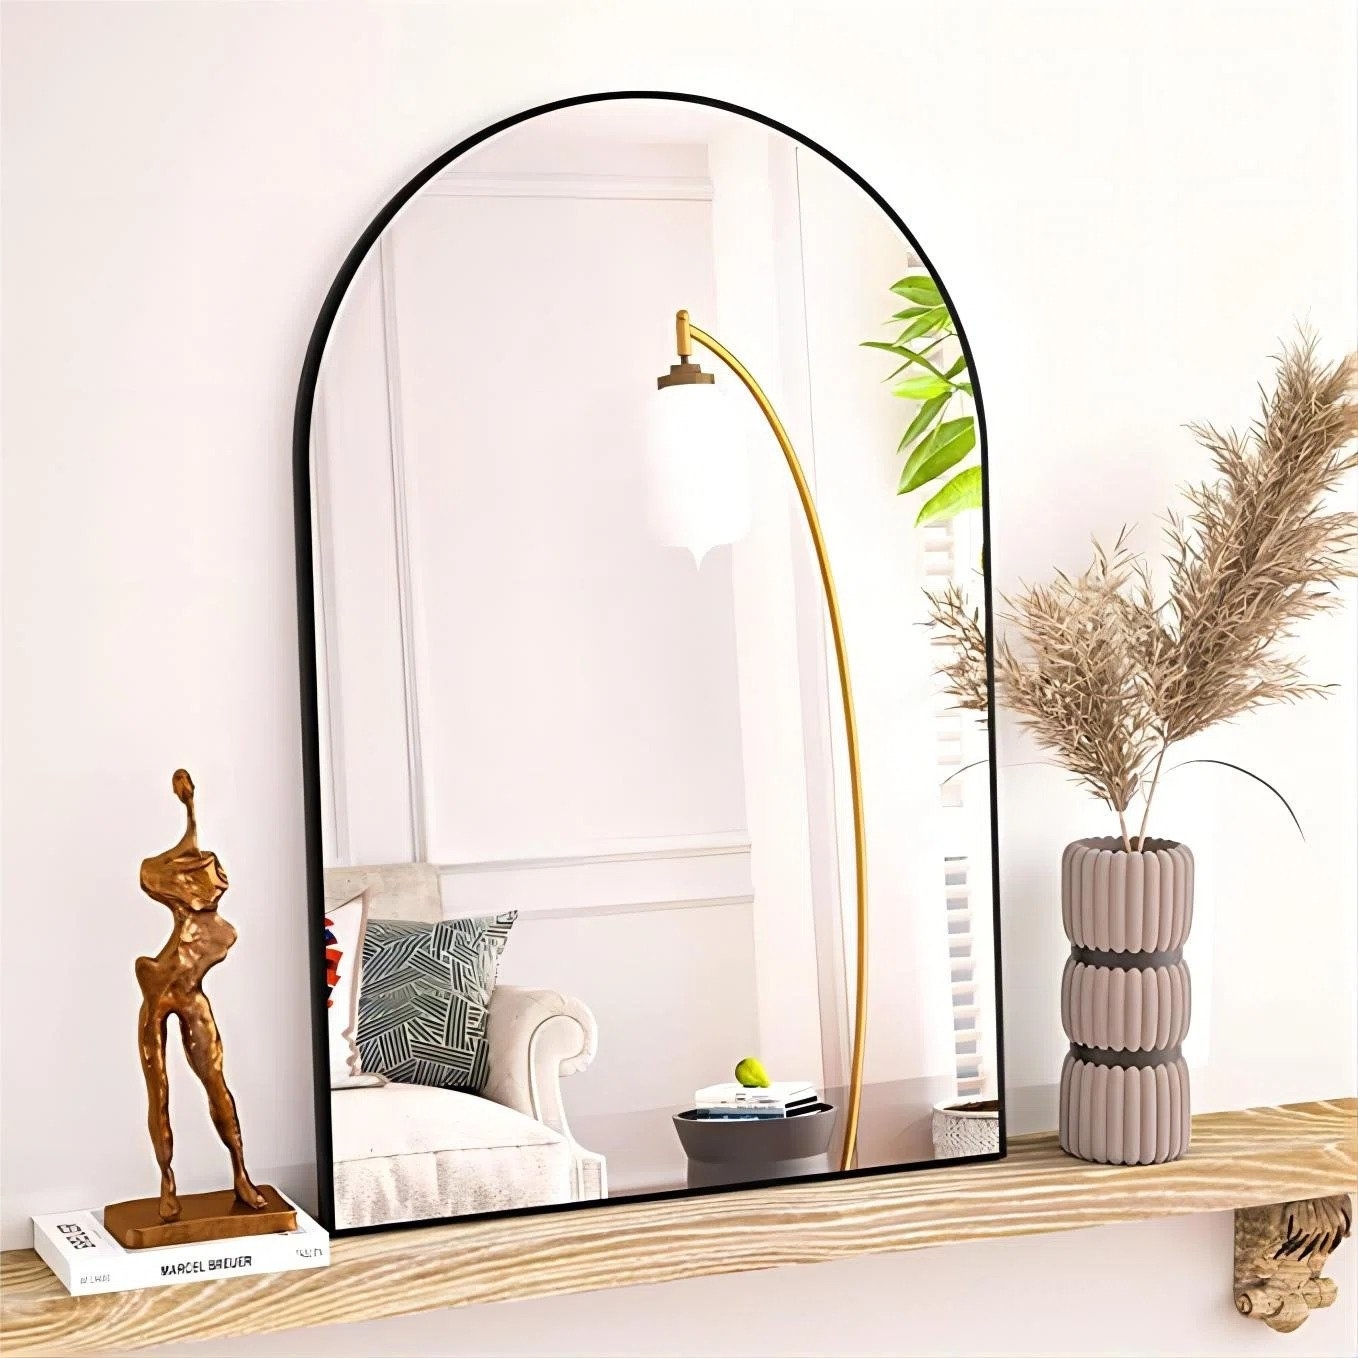 The mirror with a black finish resting on a ledge